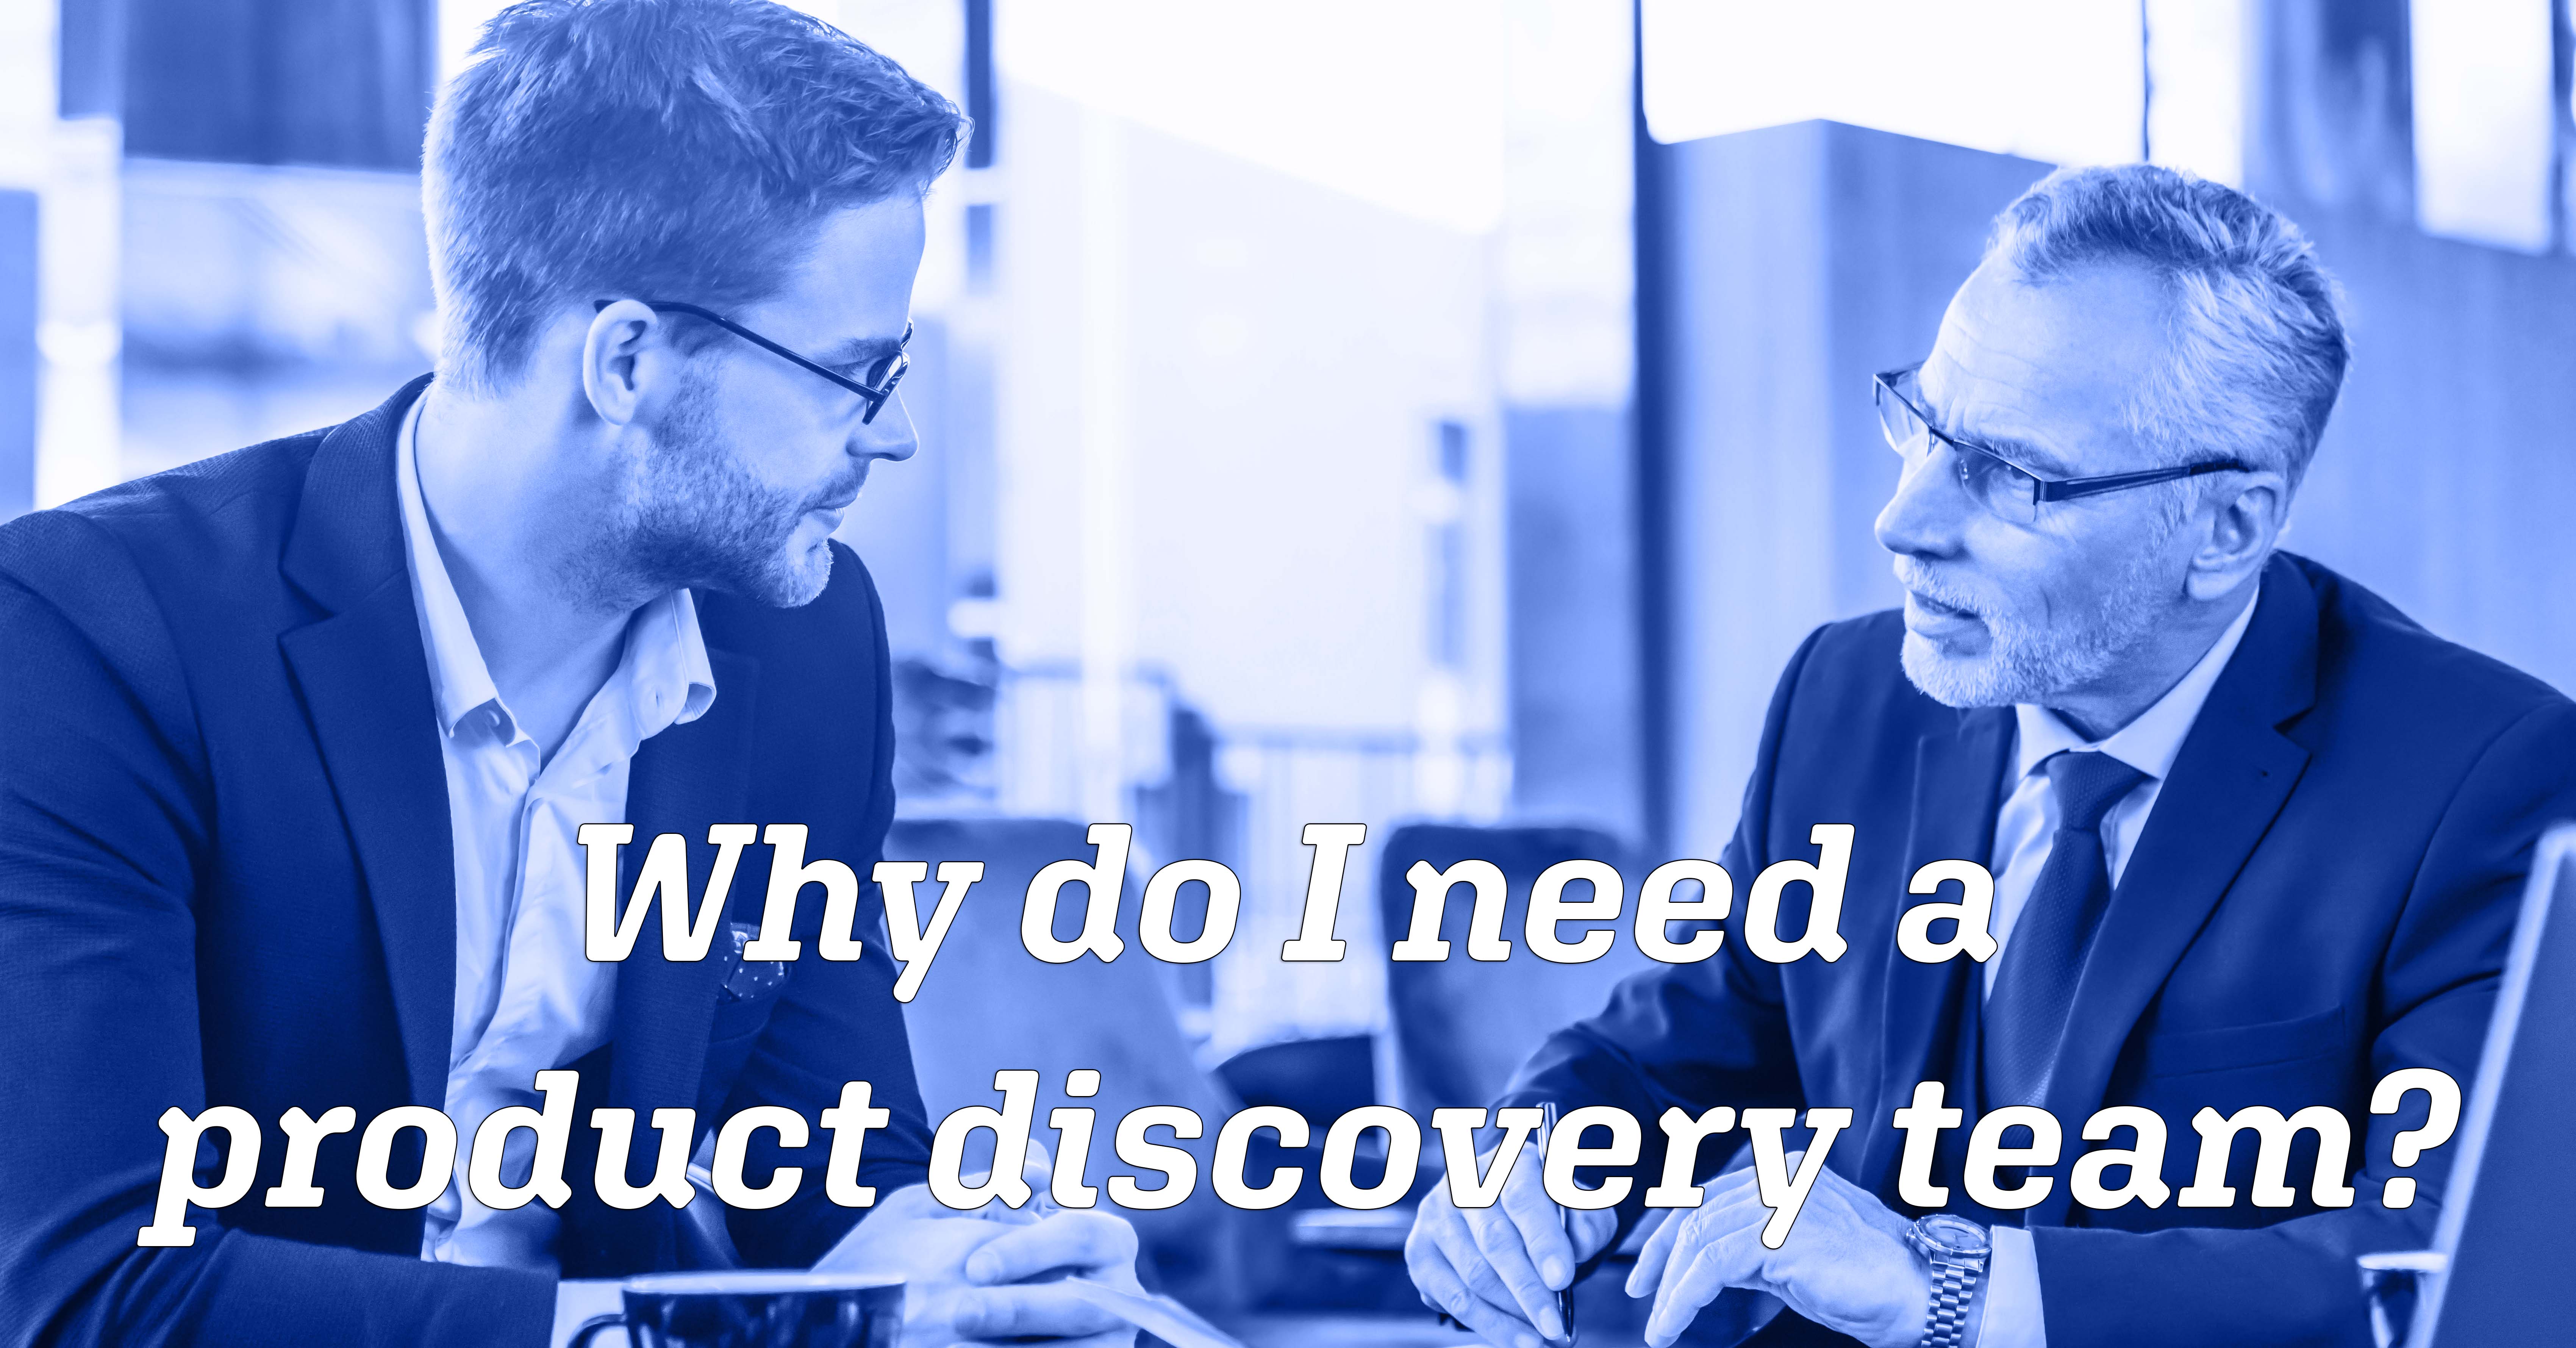 Why do I need a product discovery team?